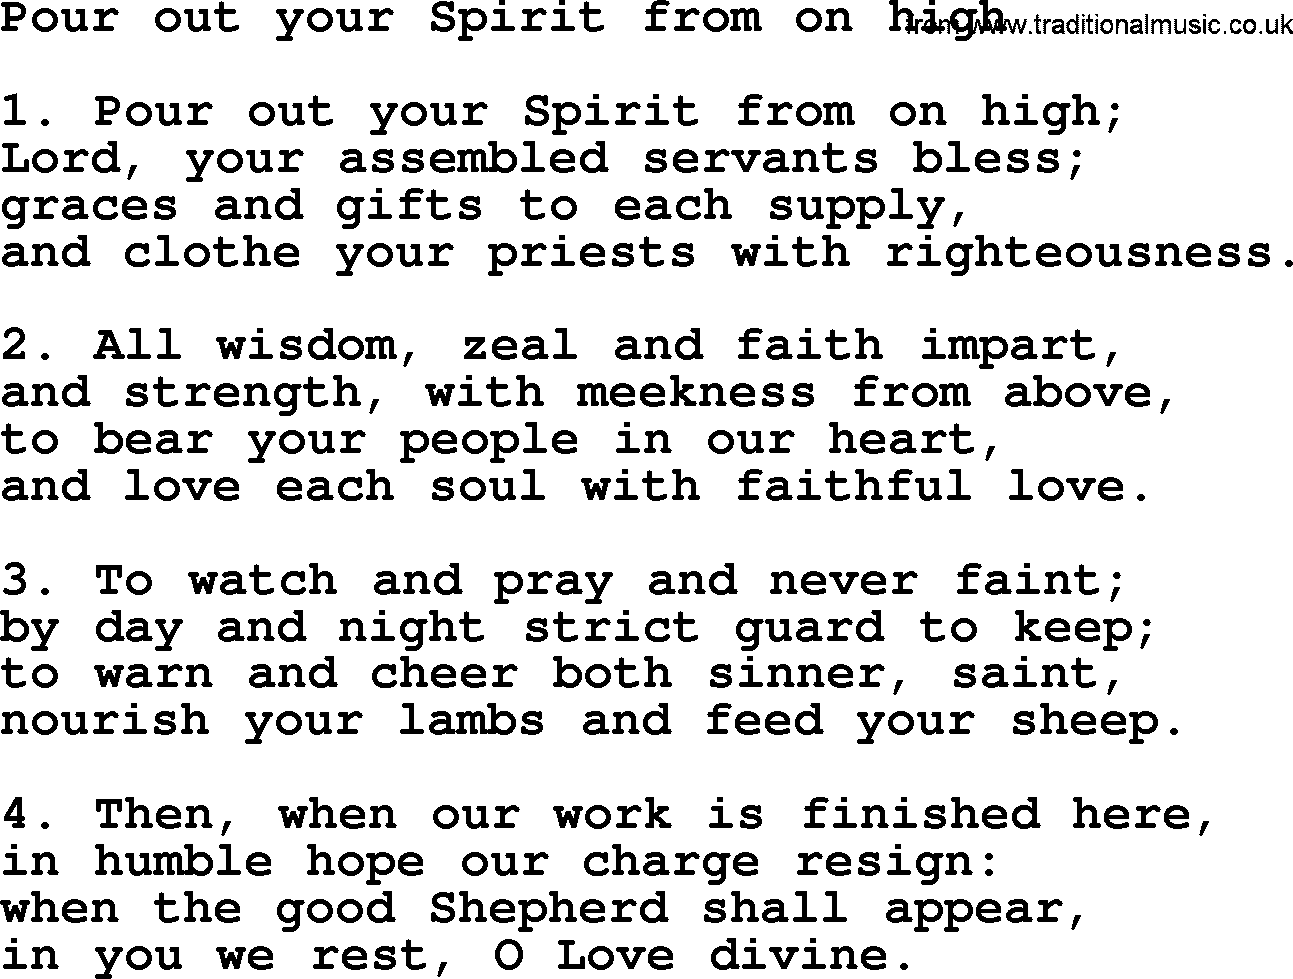 Presbyterian Hymns collection, Hymn: Pour Out Your Spirit From On High, lyrics and PDF